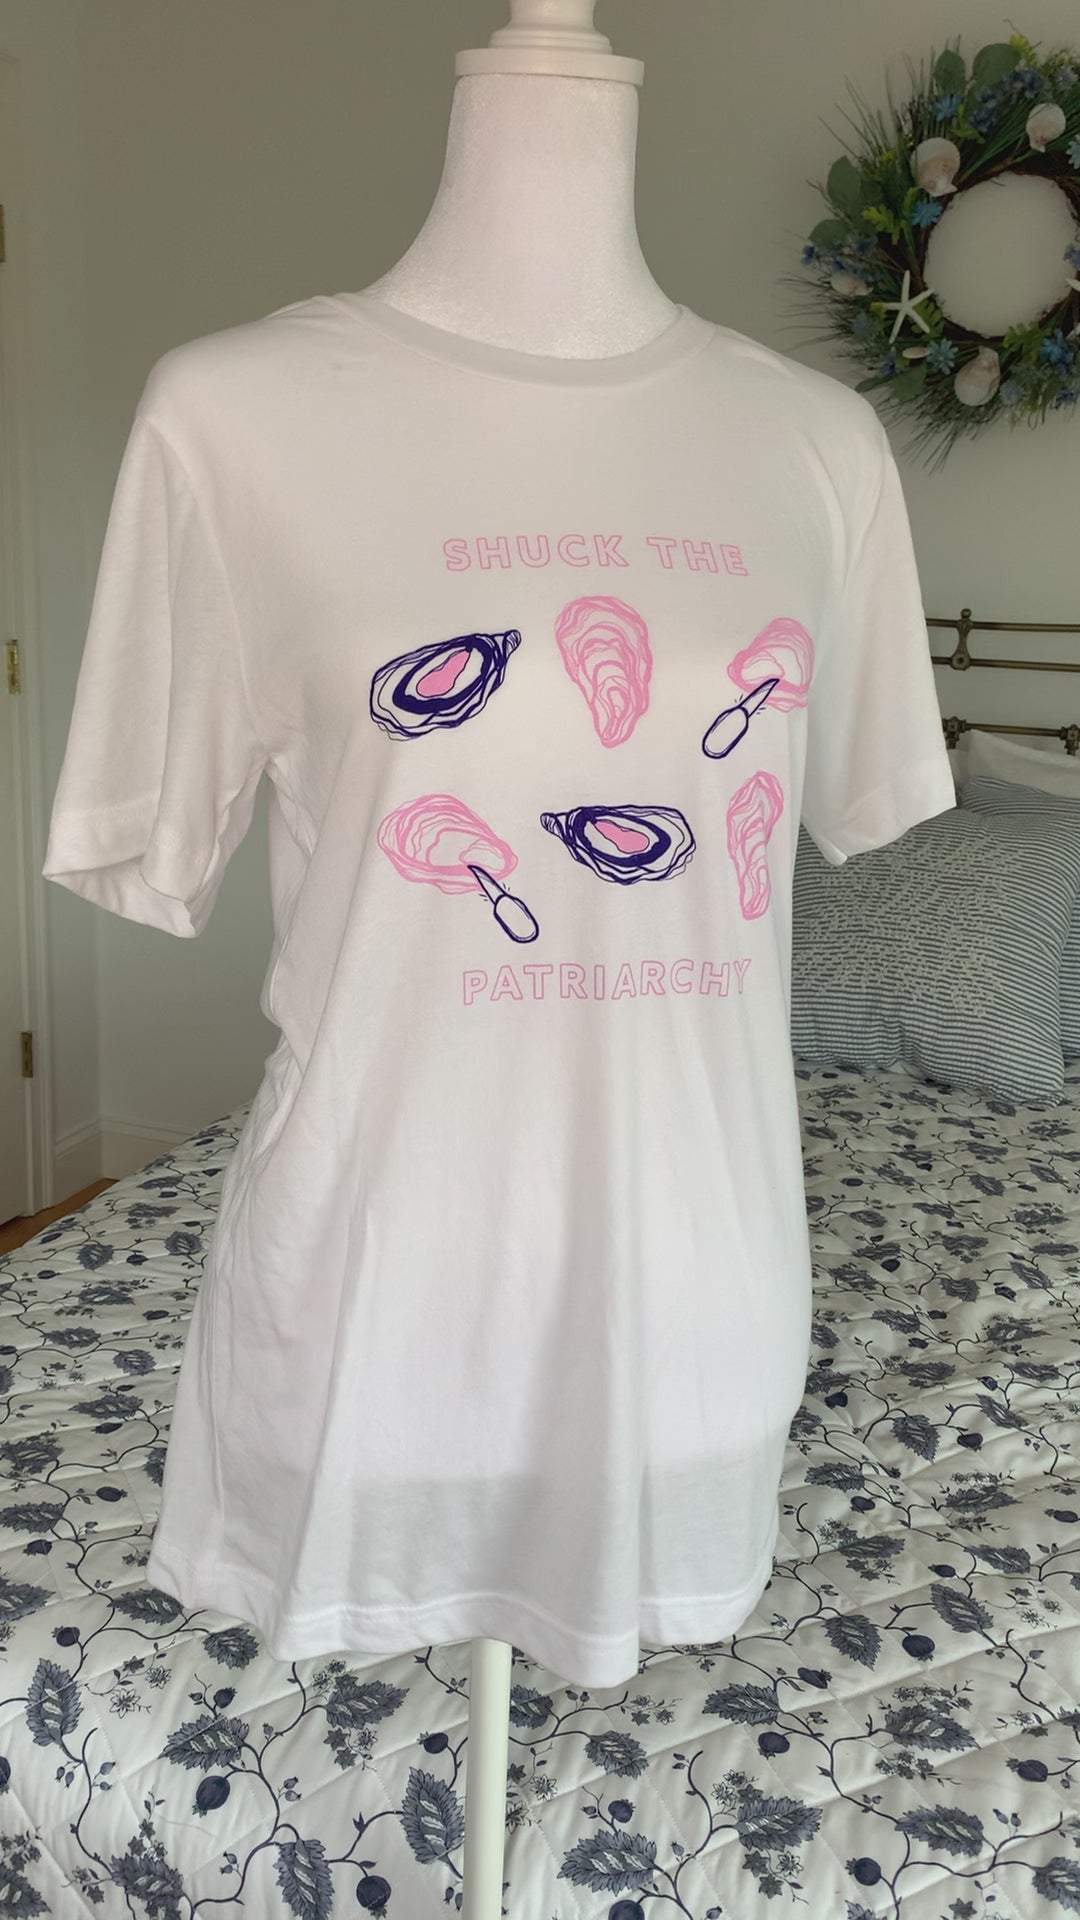 A white t-shirt that reads "Shuck the Patriarchy" in pink block letters with oyster illustrations hangs on a manikin